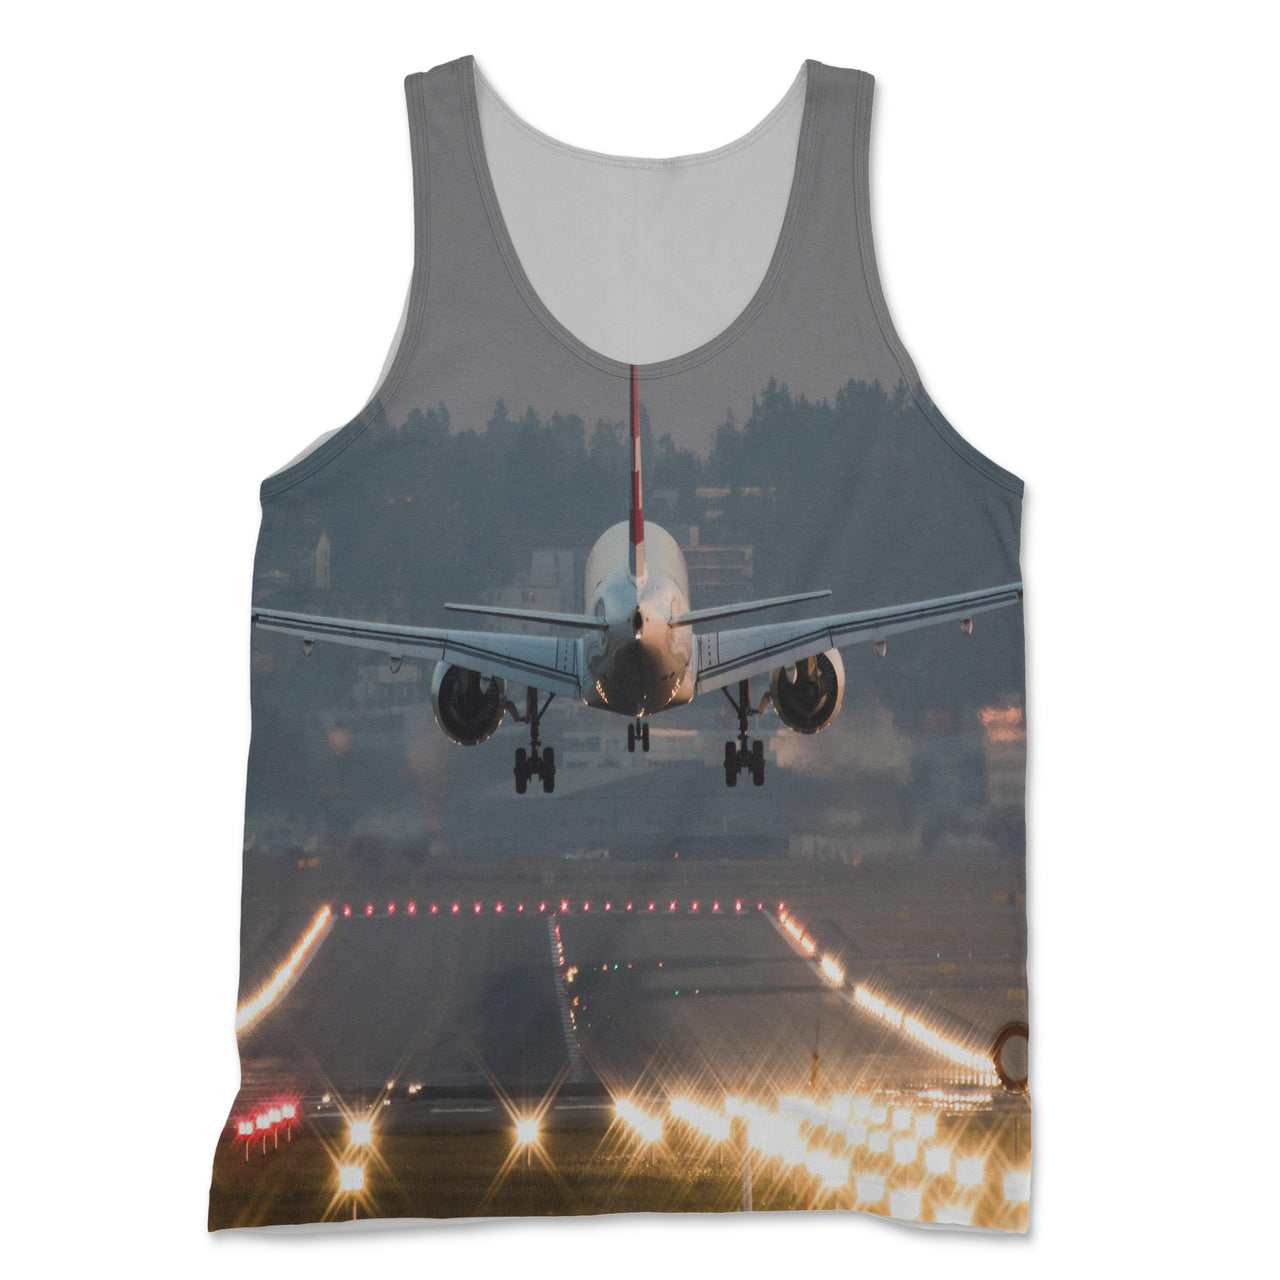 Magnificent Airplane Landing Designed 3D Tank Tops